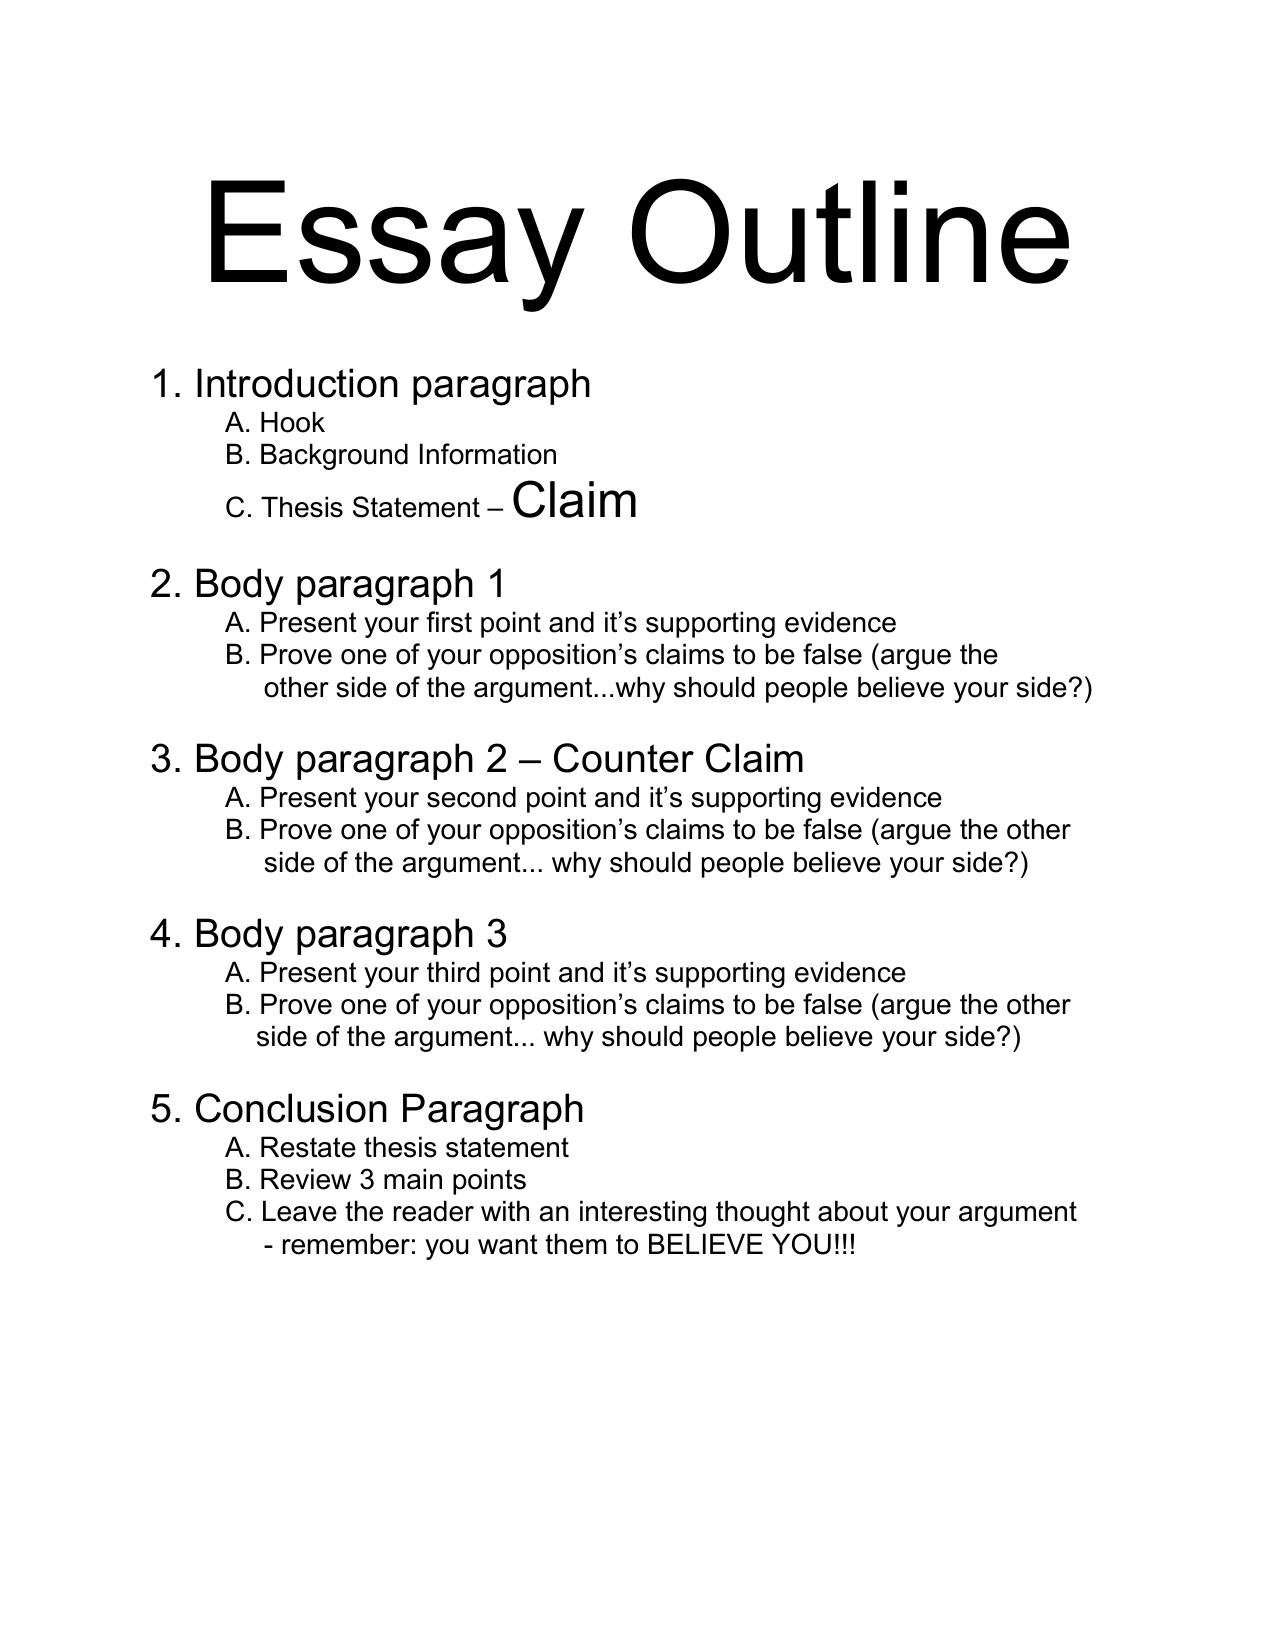 difference between outline and essay